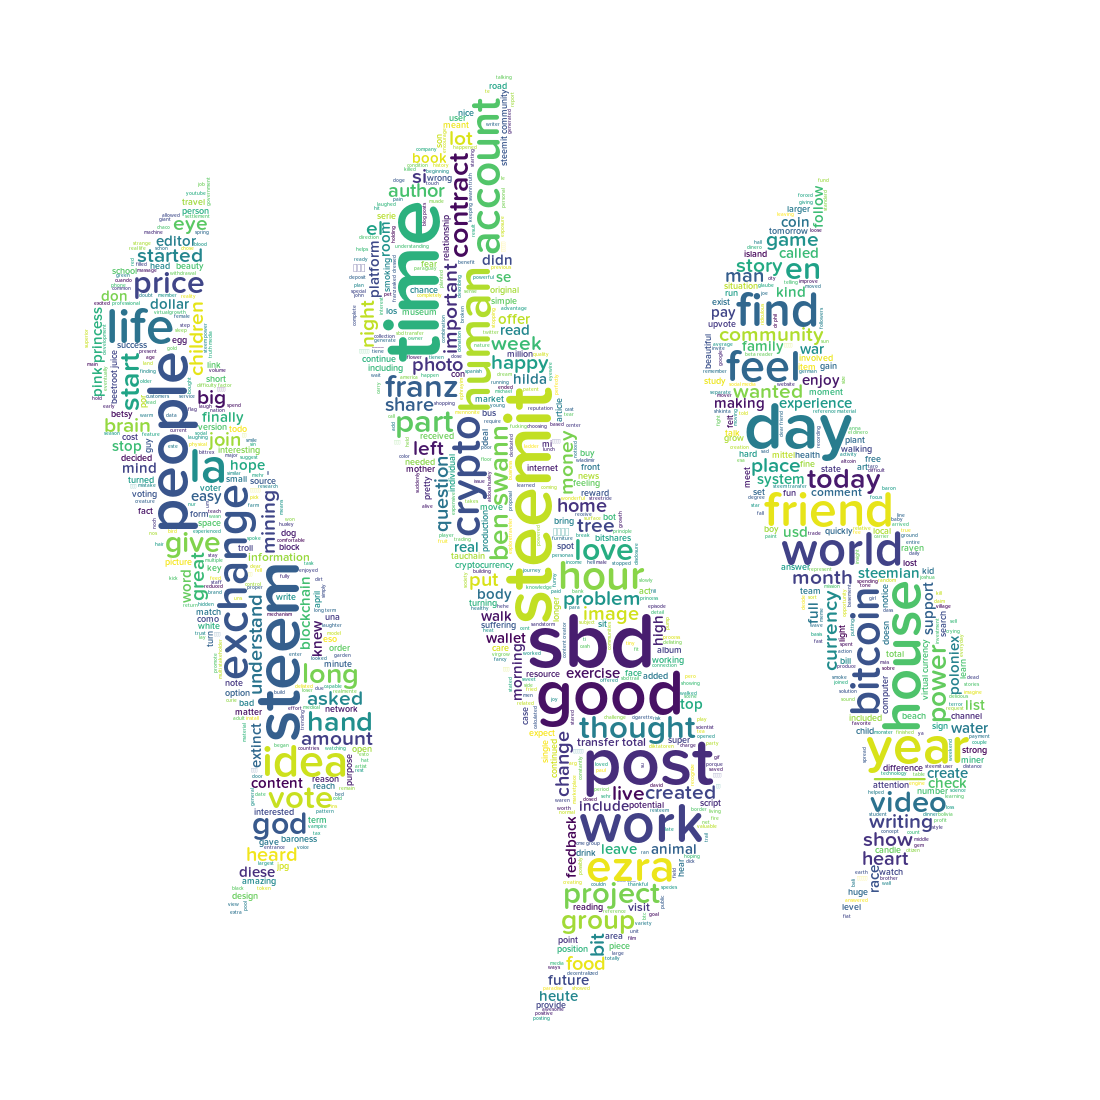 Steemit word cloud for April 19, 2017